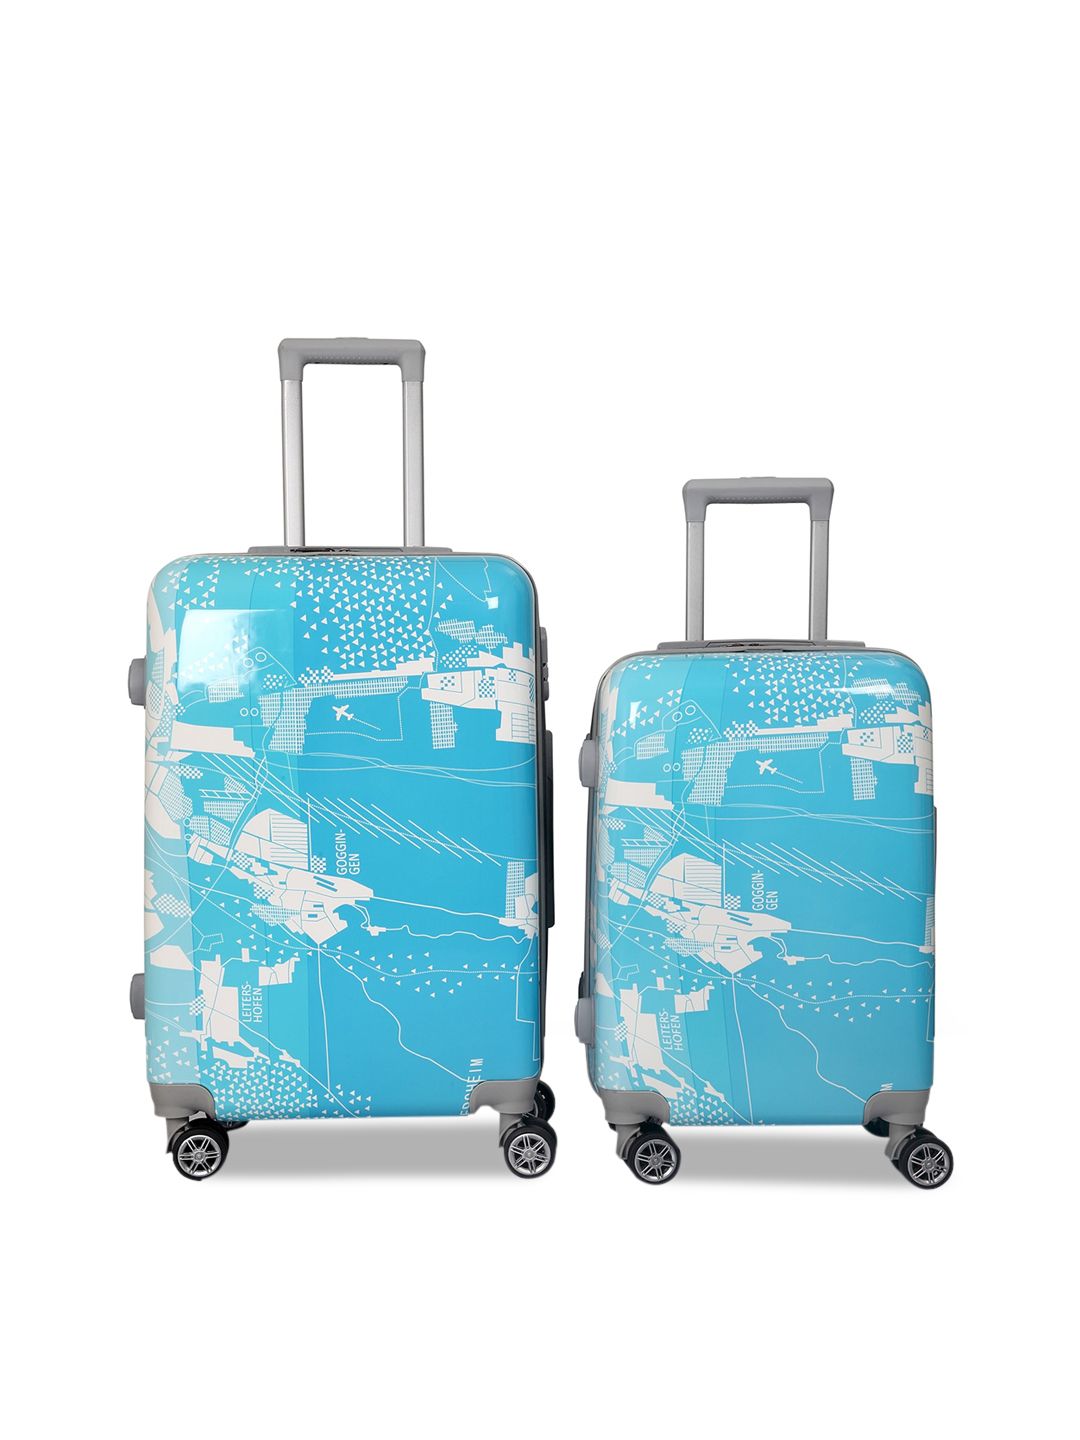 Polo Class Set Of 2 Hard-Sided Trolley Suitcases Price in India